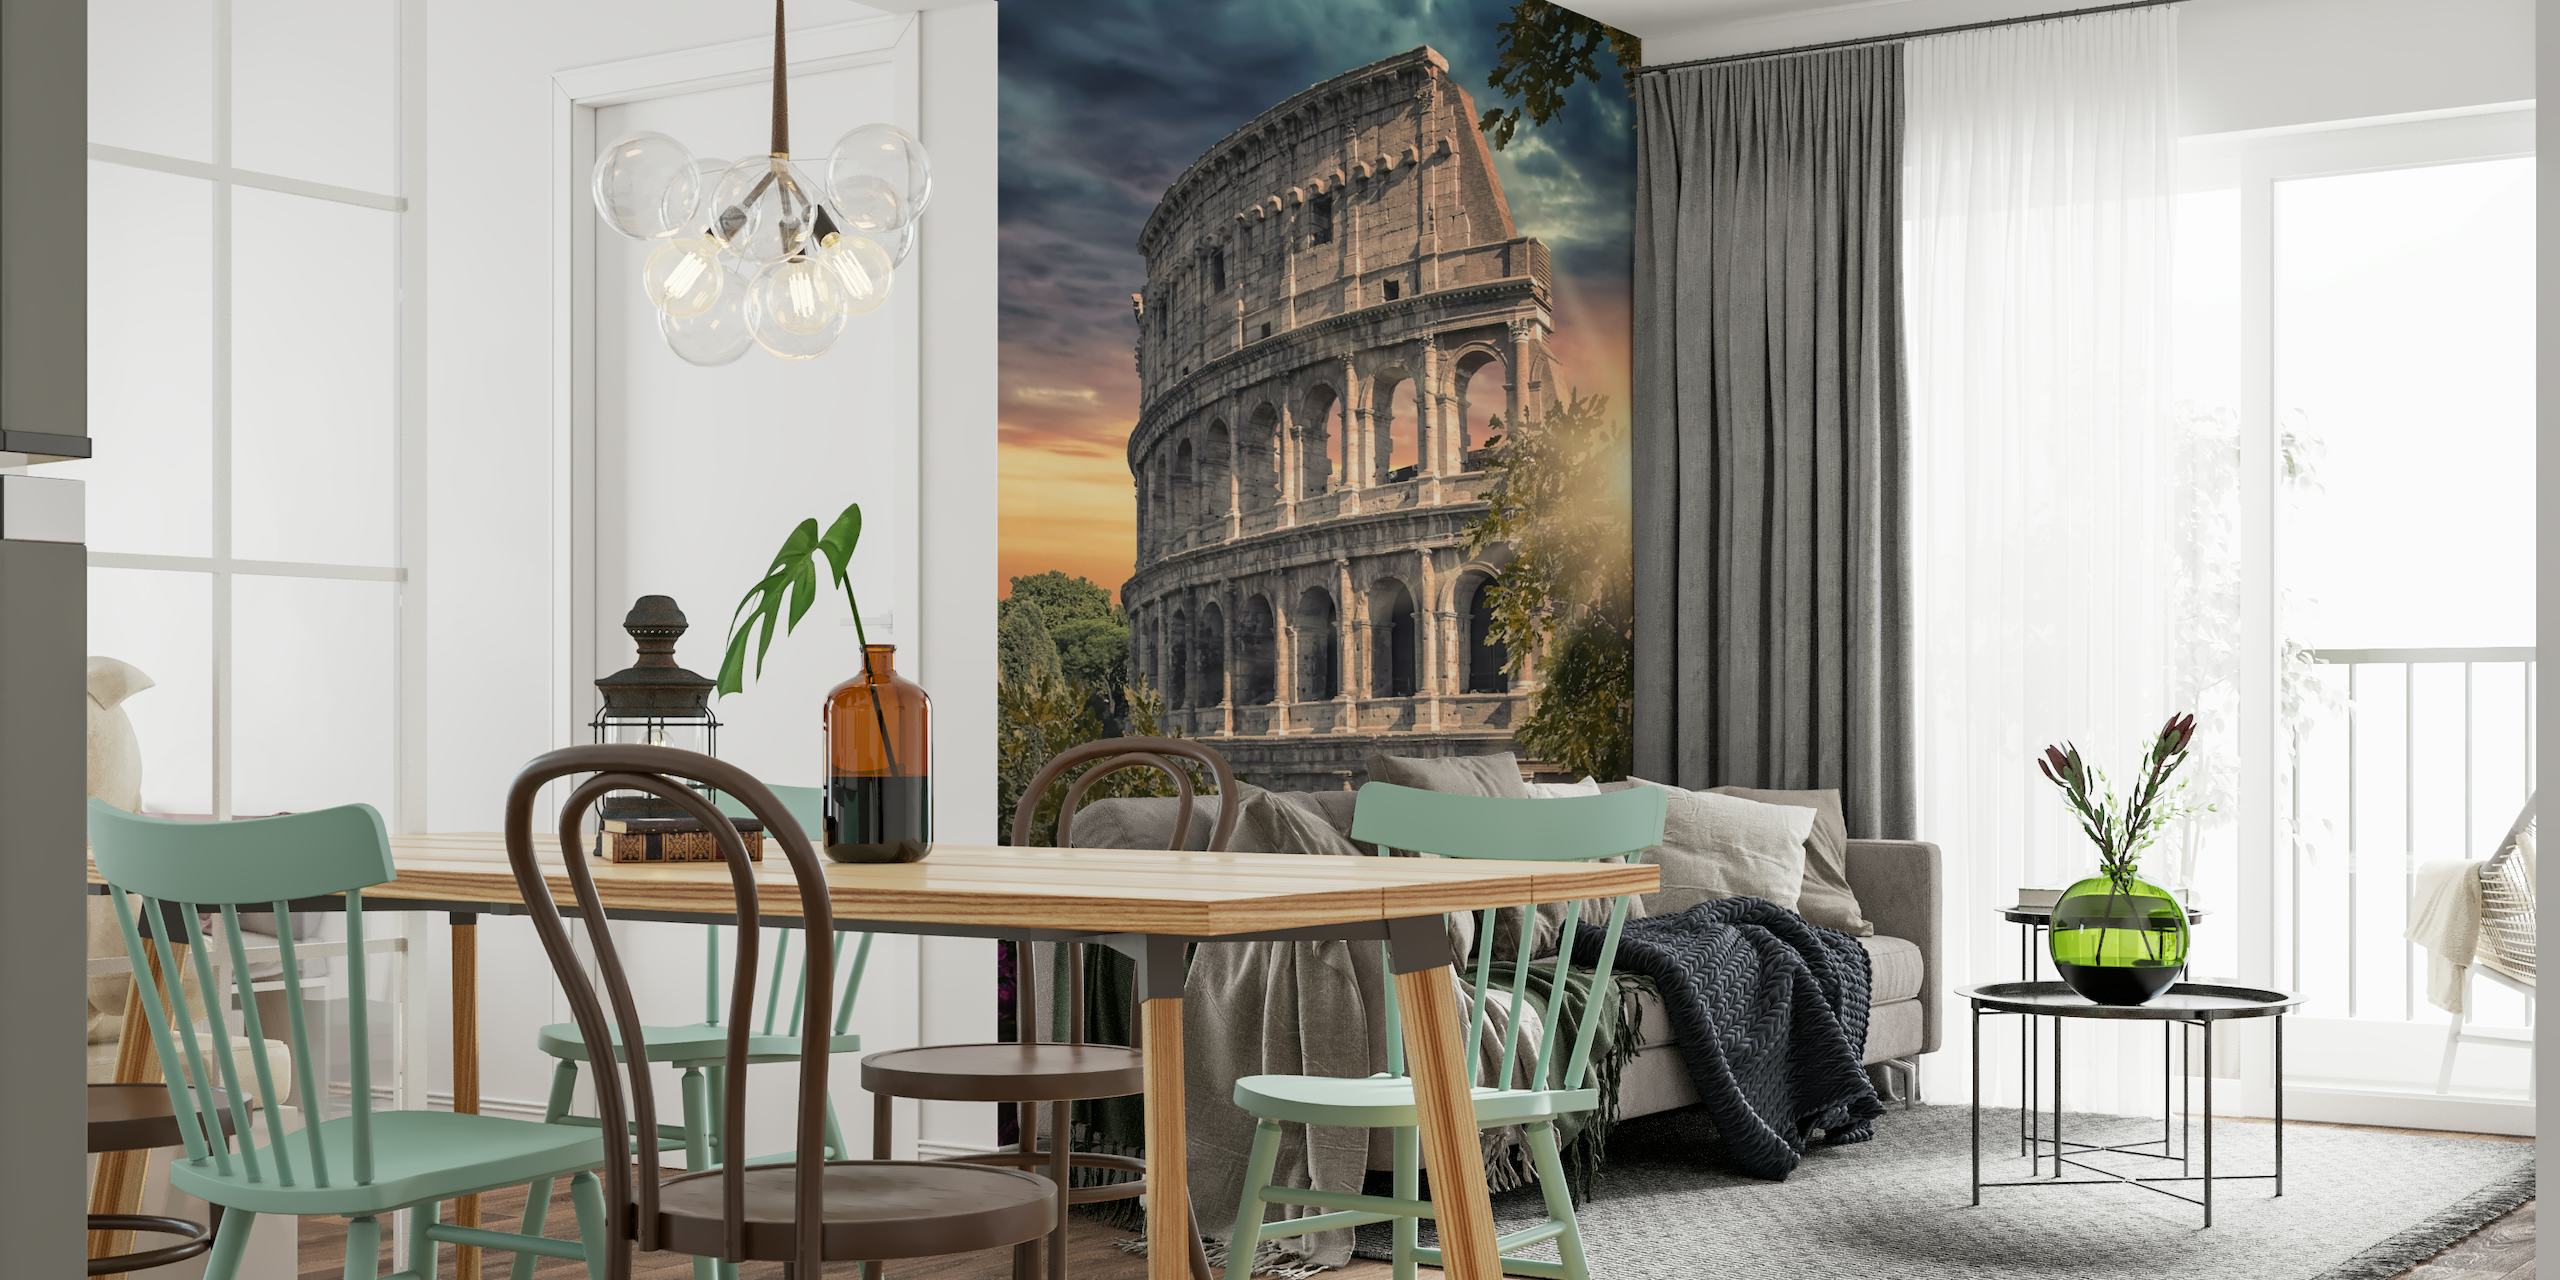 Colosseum Sunset wall mural with blooming lavender under the warm glow of the setting sun